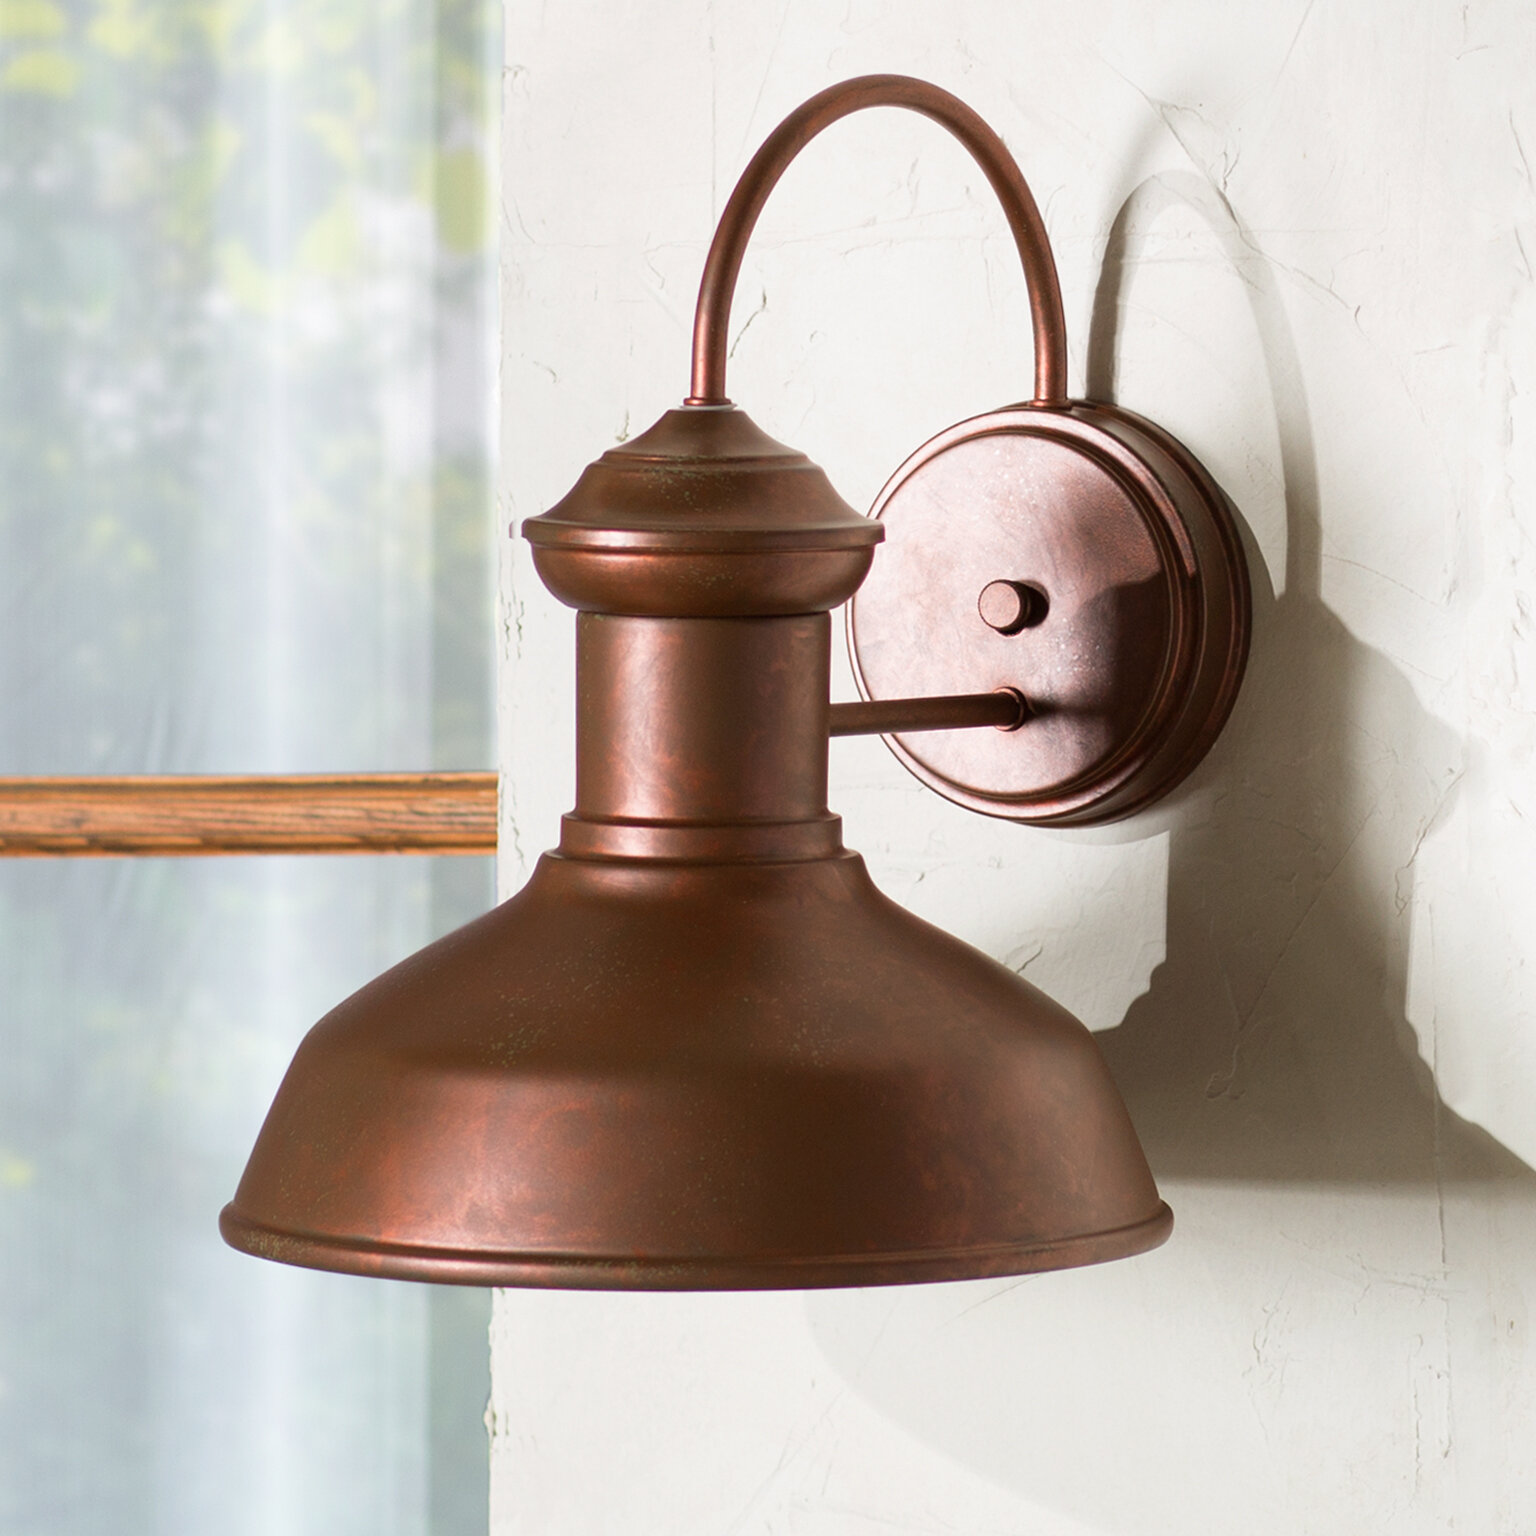 How to Clean Copper: Banish That Tarnish and Bring Back the Luster